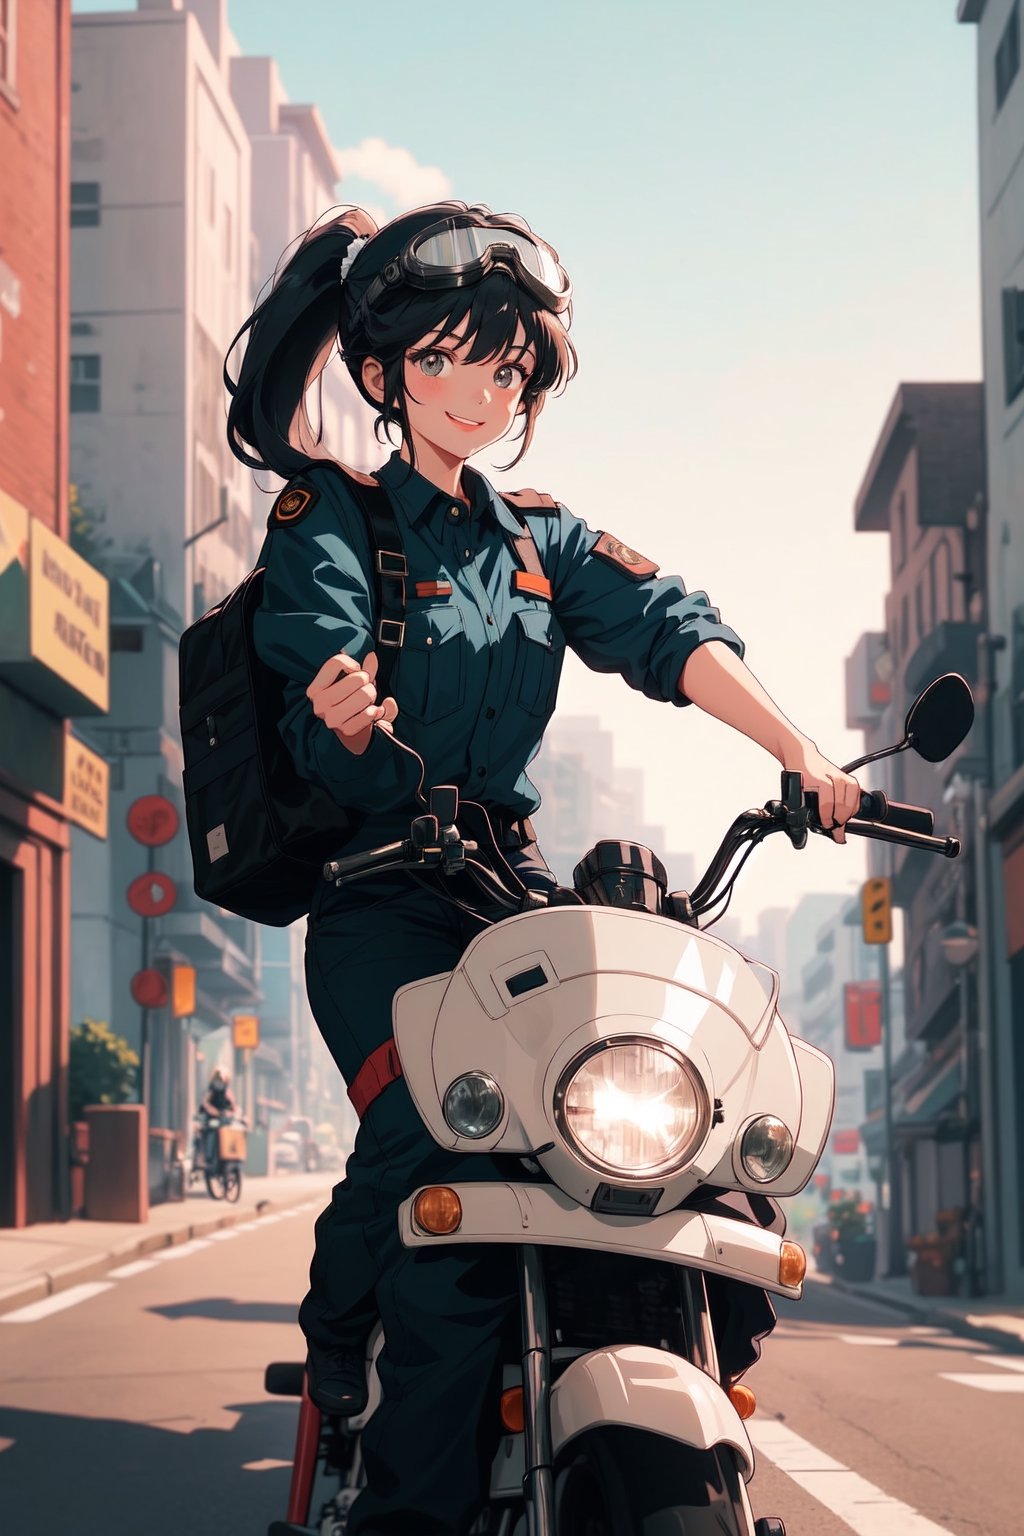 A young woman riding a motorcycle down a city street, wearing a delivery uniform and carrying a large delivery bag. She is wearing a helmet and goggles, and her hair is tied back in a ponytail. She is smiling and confident, and she is clearly enjoying her job.